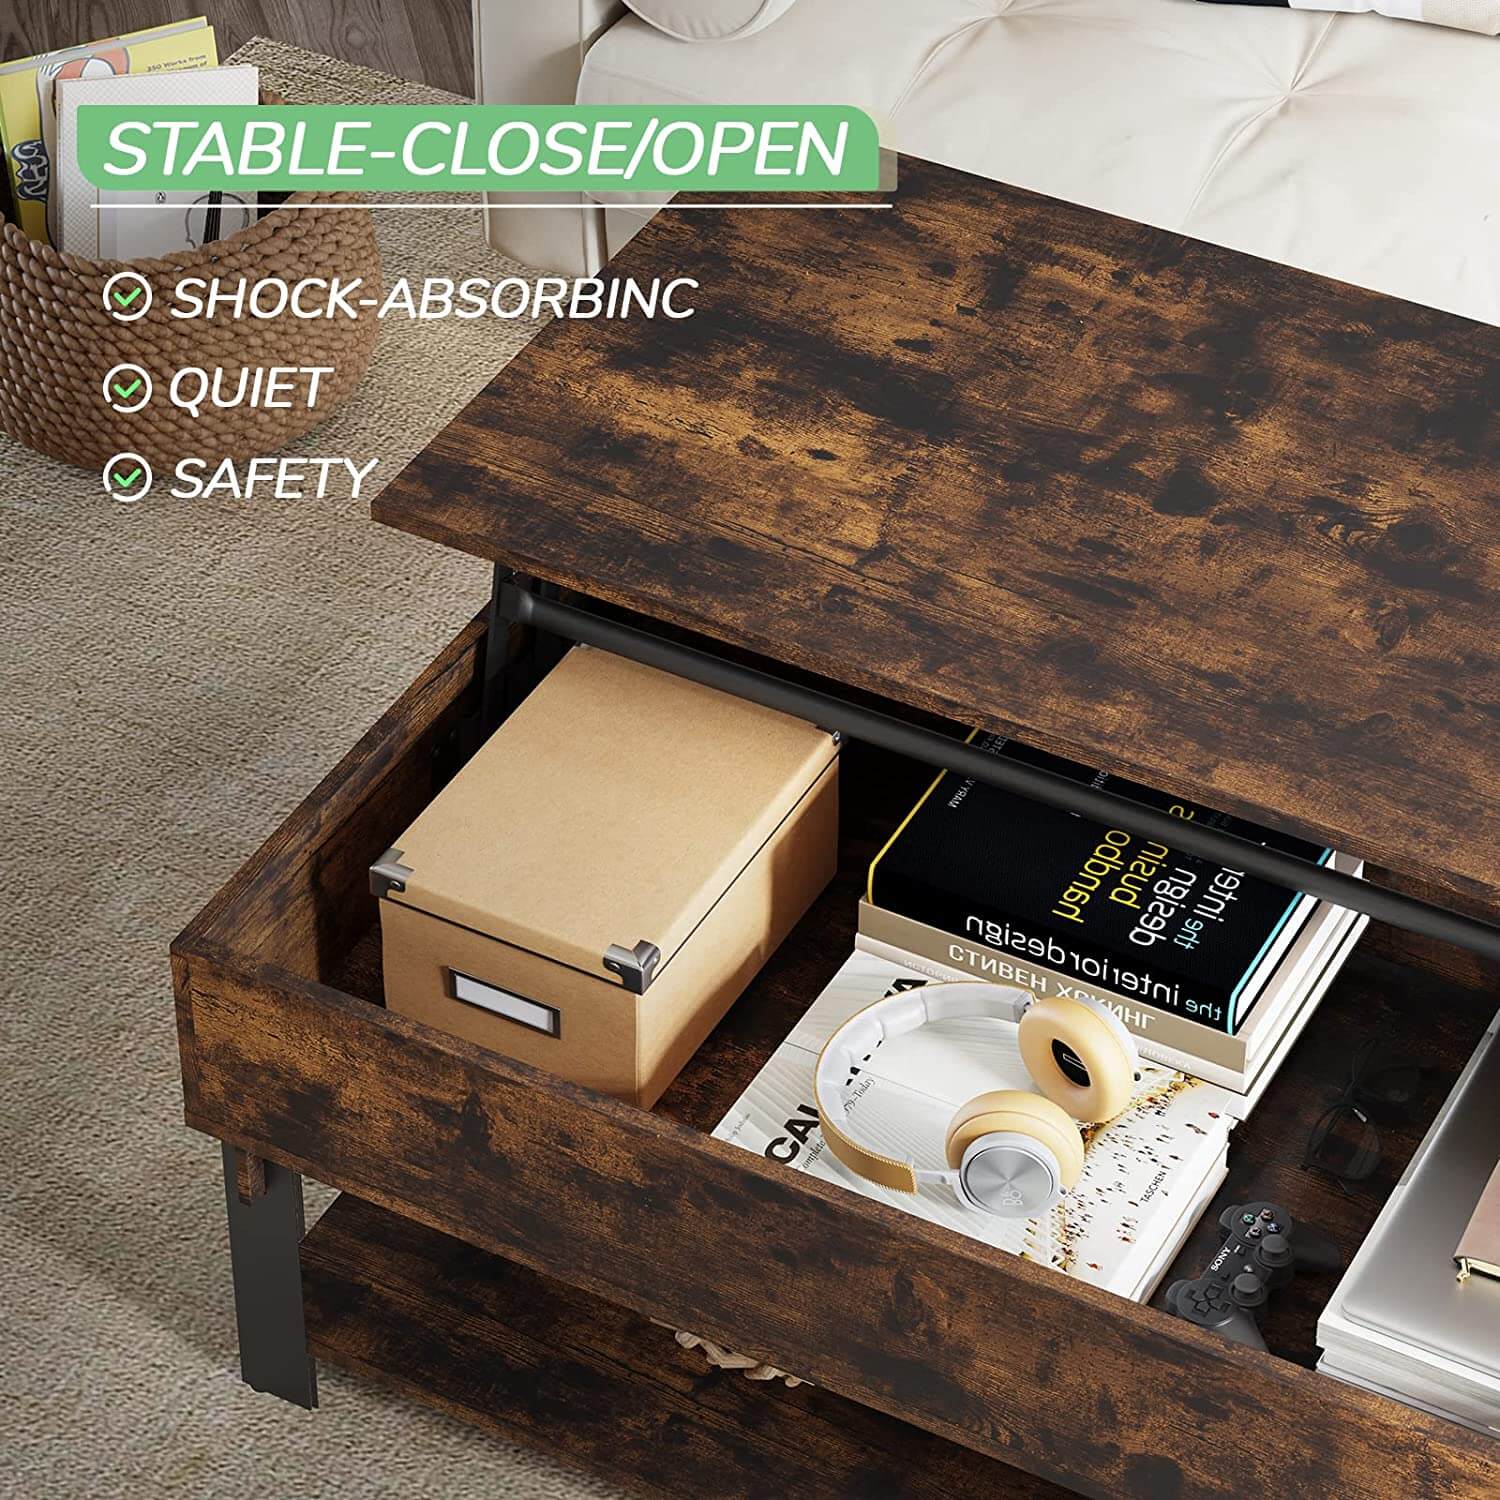 Double-layered Coffee Table with Pop-Up Storage Space